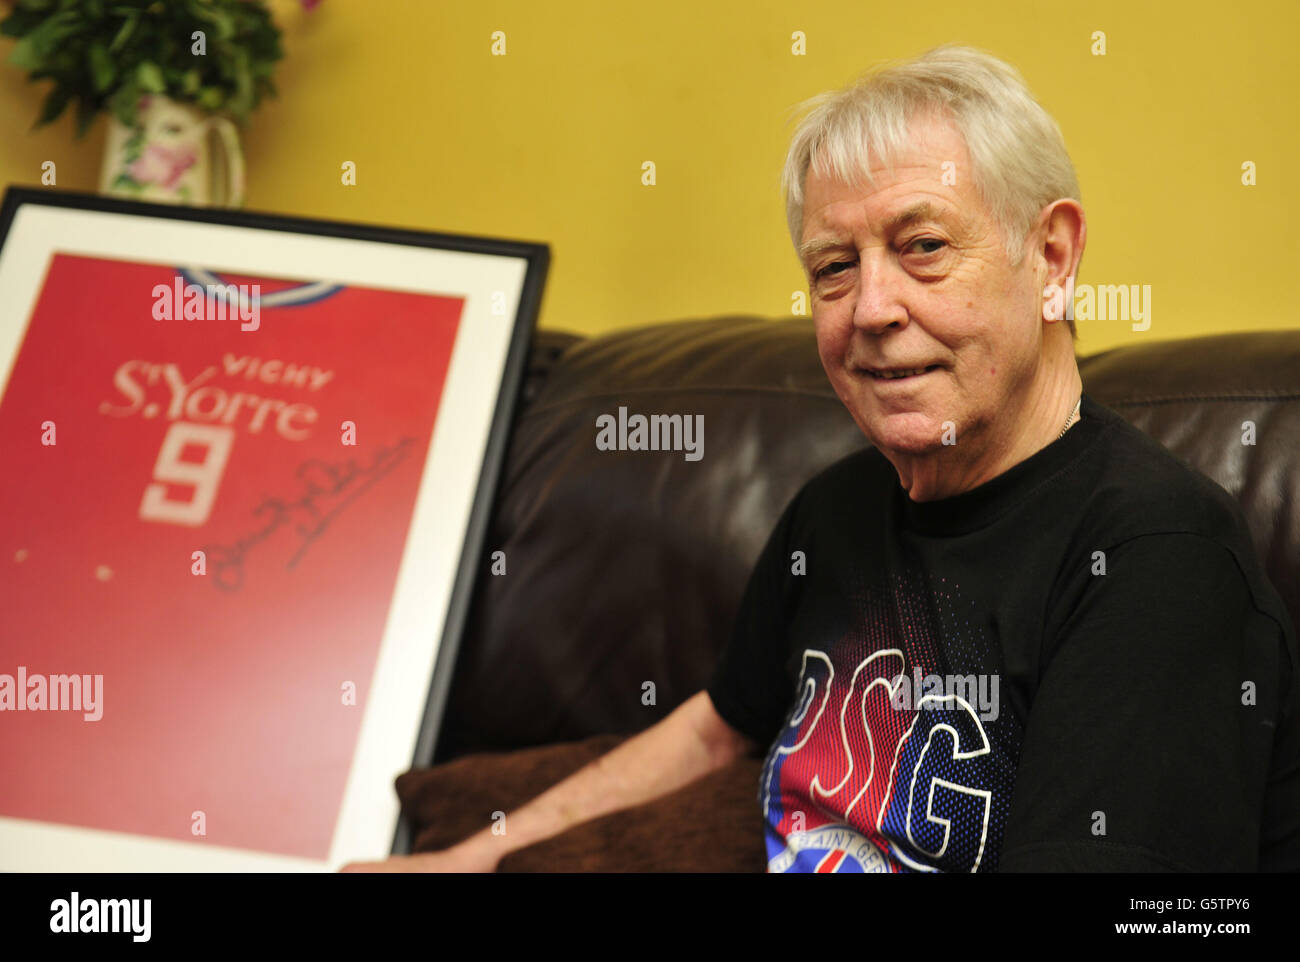 Soccer - Jantzen Derrick Feature - Bristol. Former PSG and Bristol City player Jantzen Derrick poses with a framed shirt, at his home in Bristol. Stock Photo